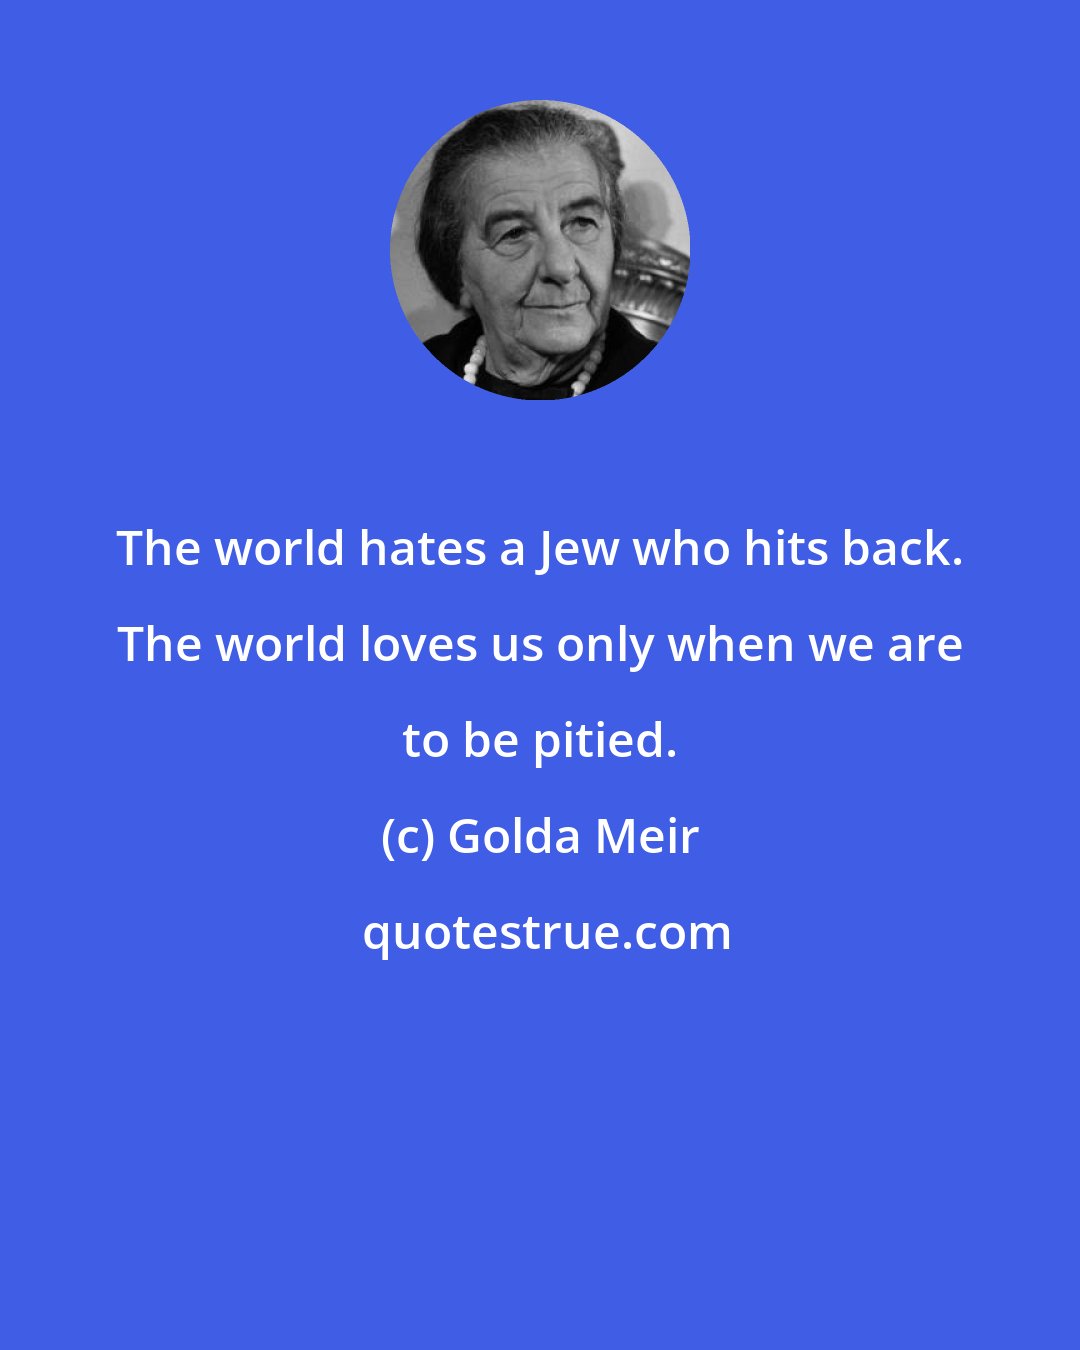 Golda Meir: The world hates a Jew who hits back. The world loves us only when we are to be pitied.